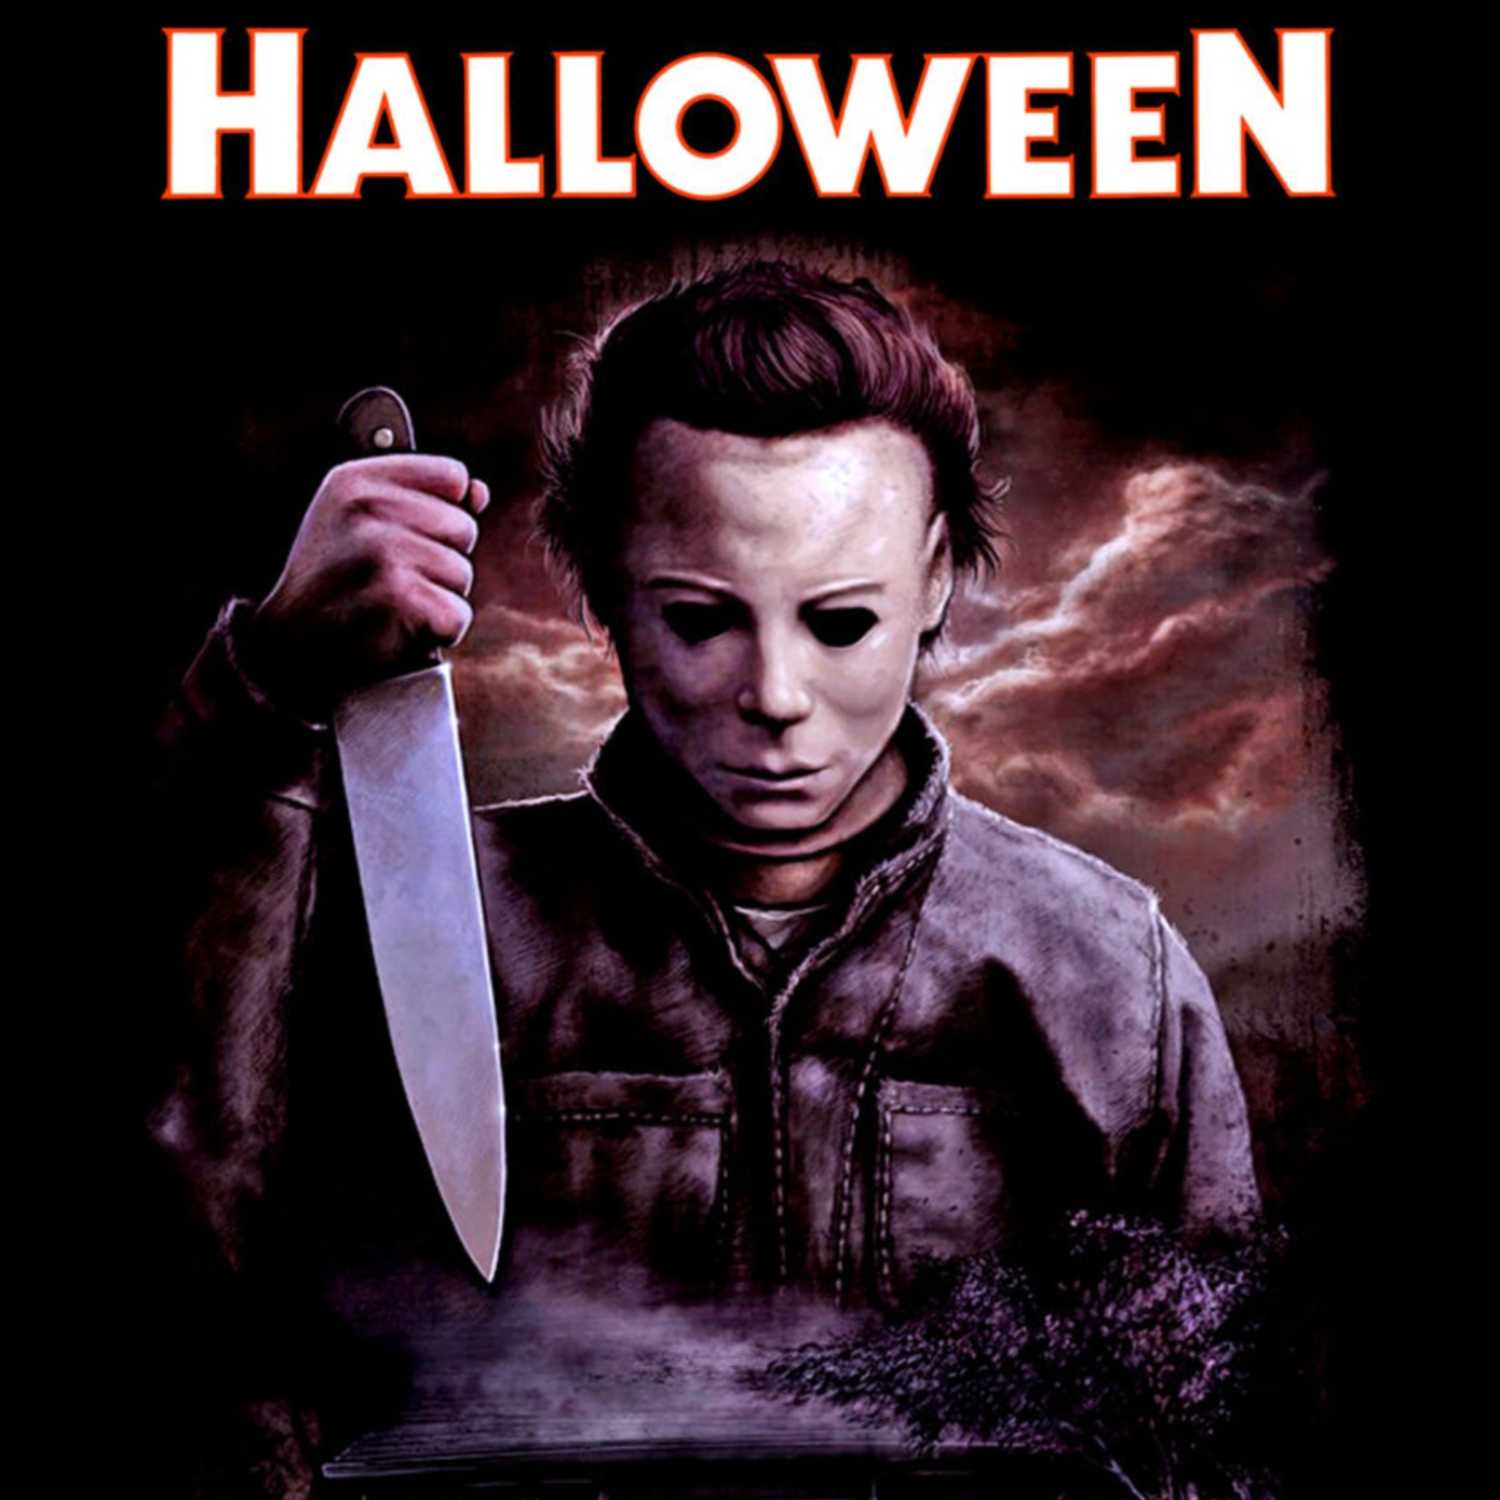 TRUE STORY BEHIND The Halloween Movie Franchise